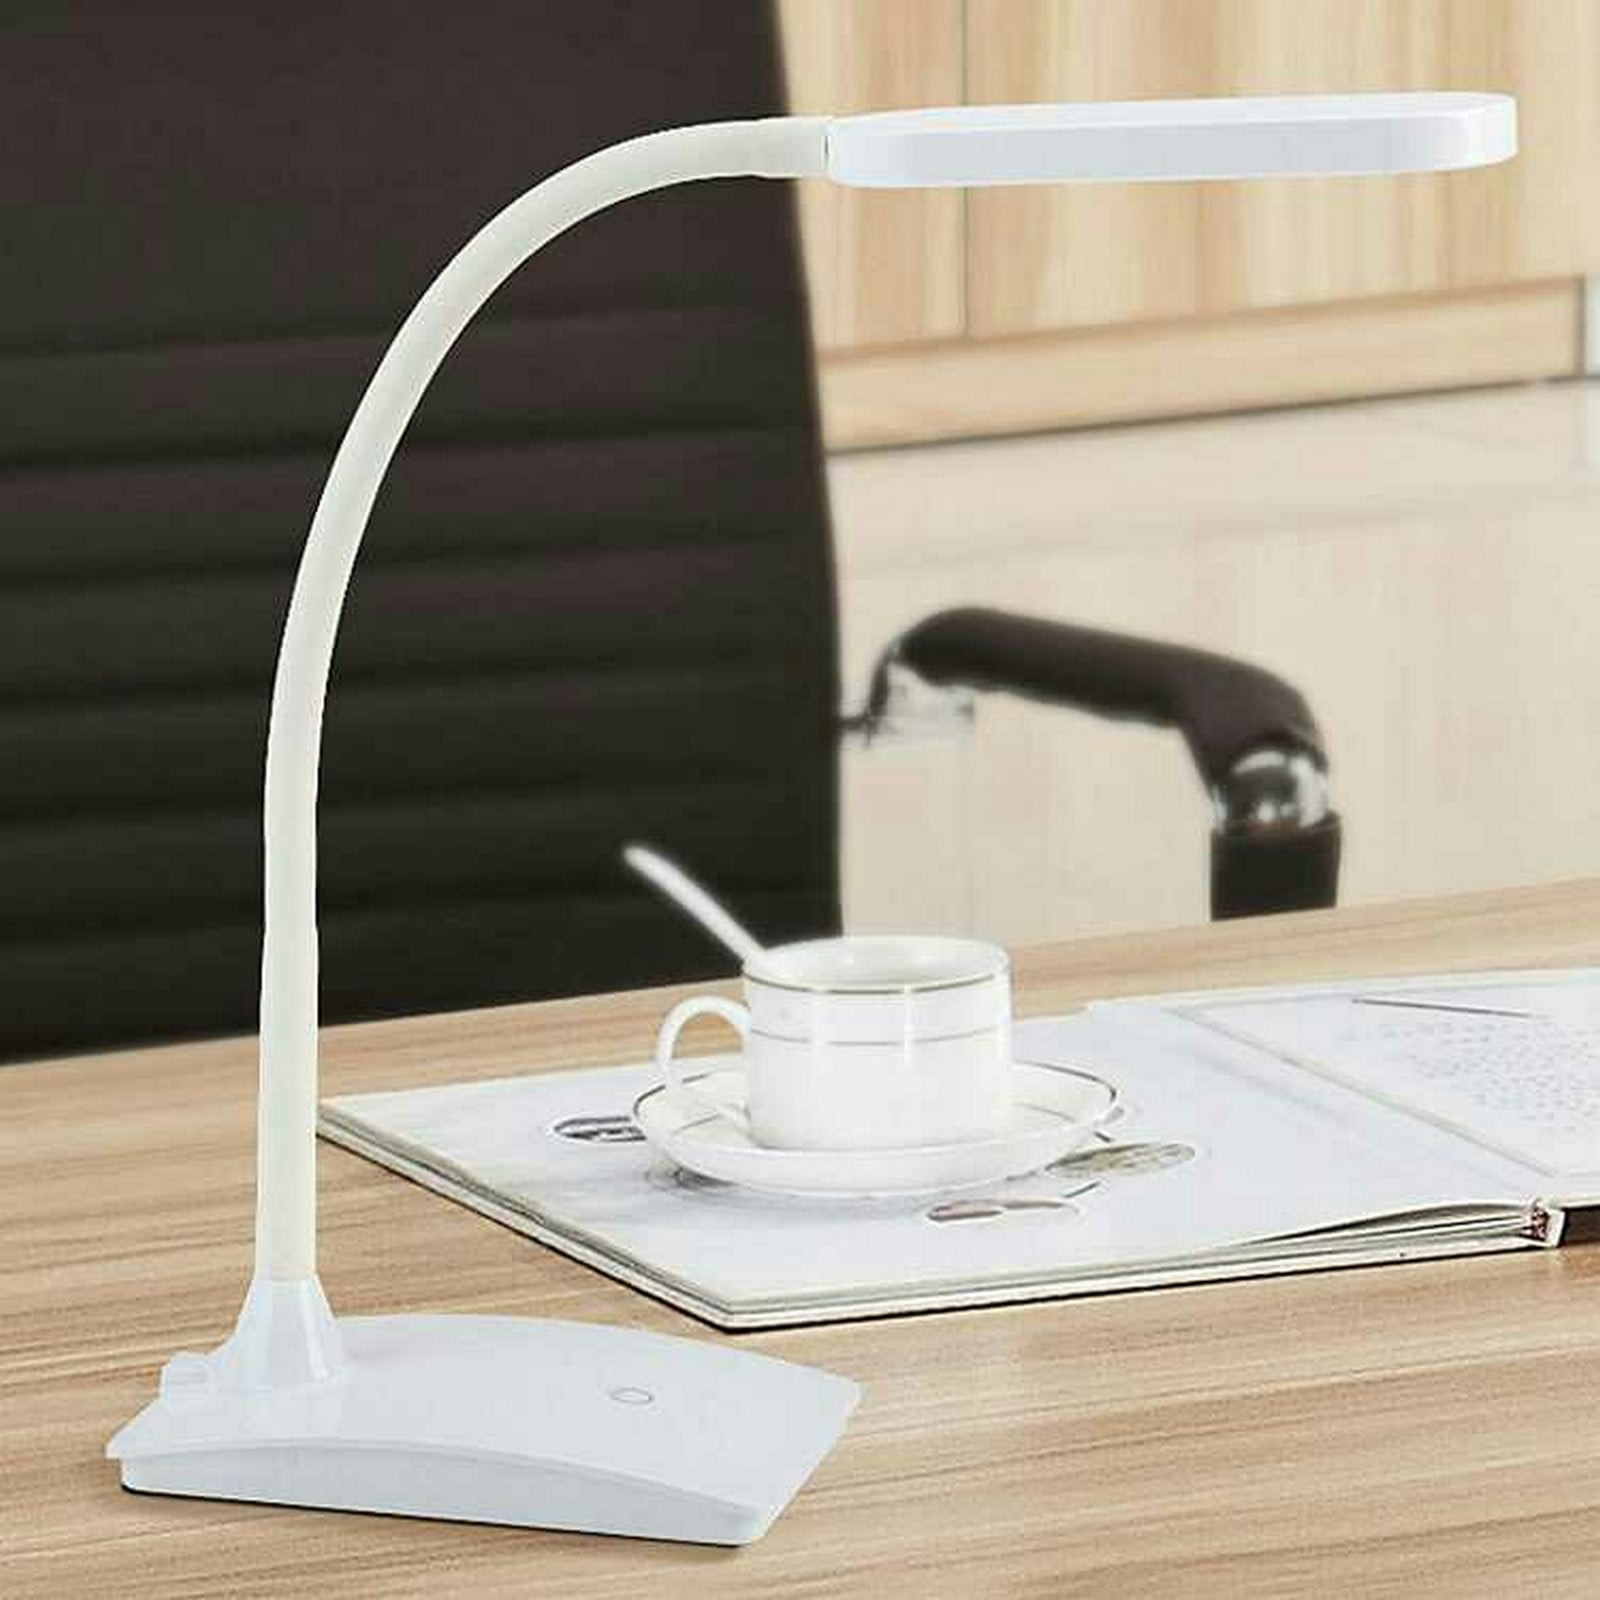 Stepless Brightness Control Office Light with  Multi-Stage Light Modes Touch Sensor Control Lian LifeStyle Stylish Foldable ABS Table Lamps Memory/Favorite Function Night Light LTL-C9 White 